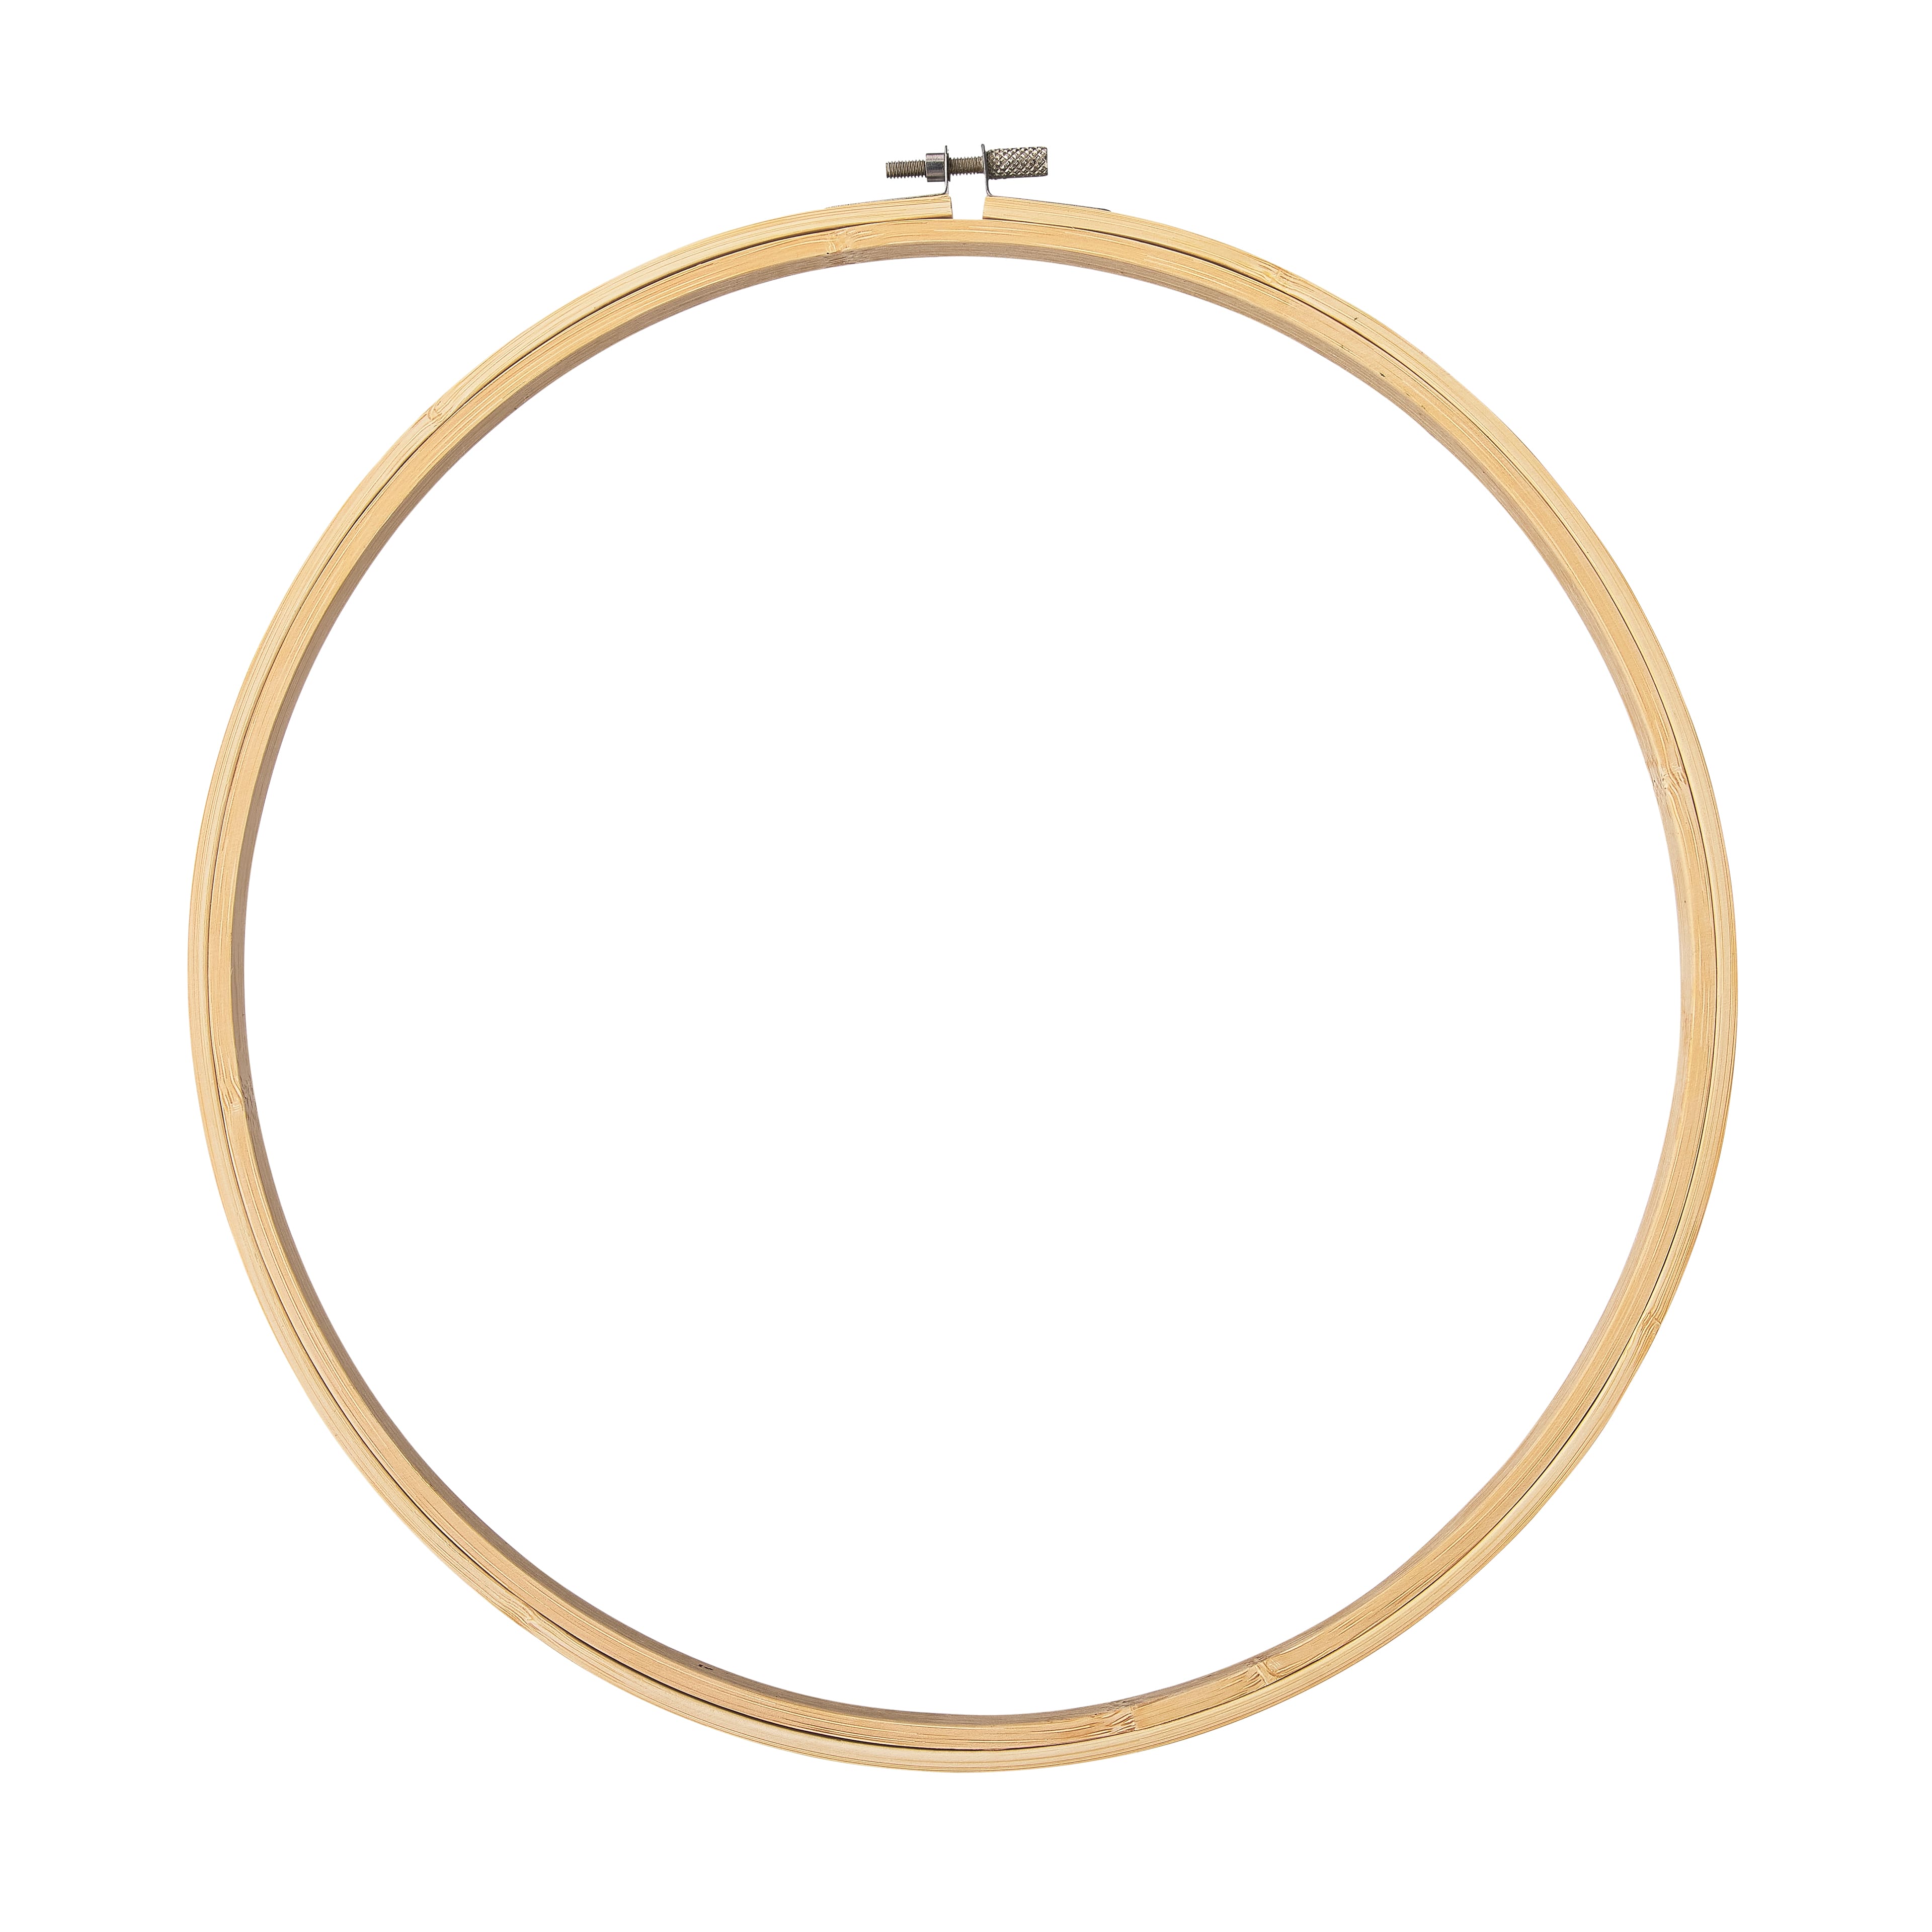 12 inch Large Round Wooden Embroidery Hoop 1 Piece